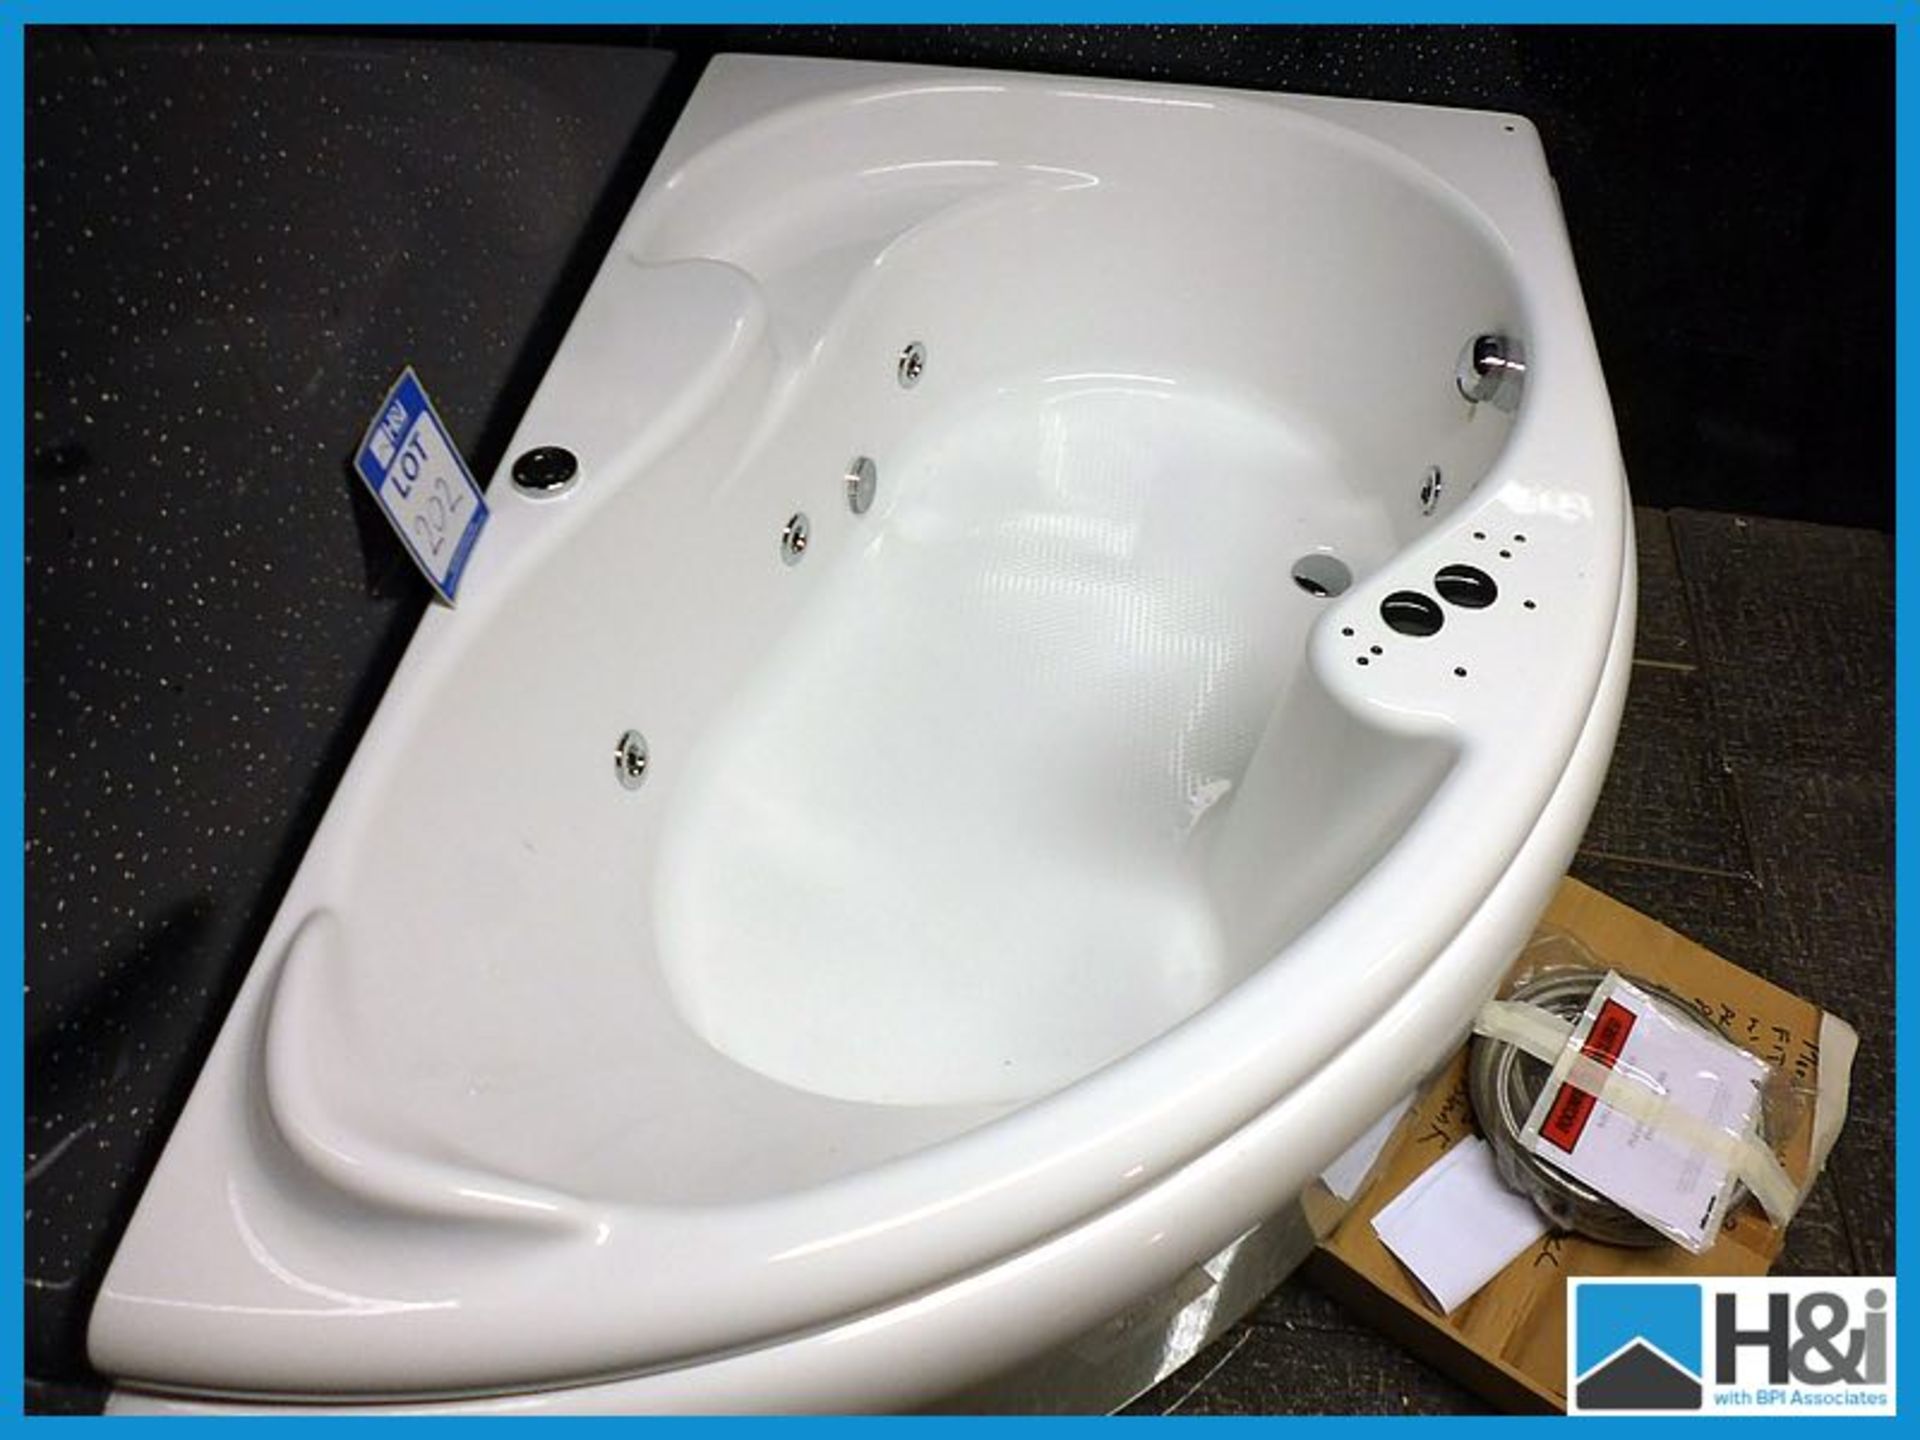 Designer White Whirlpool Corner Bath with 6 Jets. Approx 1500mm x 1000mm. Ex-Display. Typical RRP - Image 2 of 4